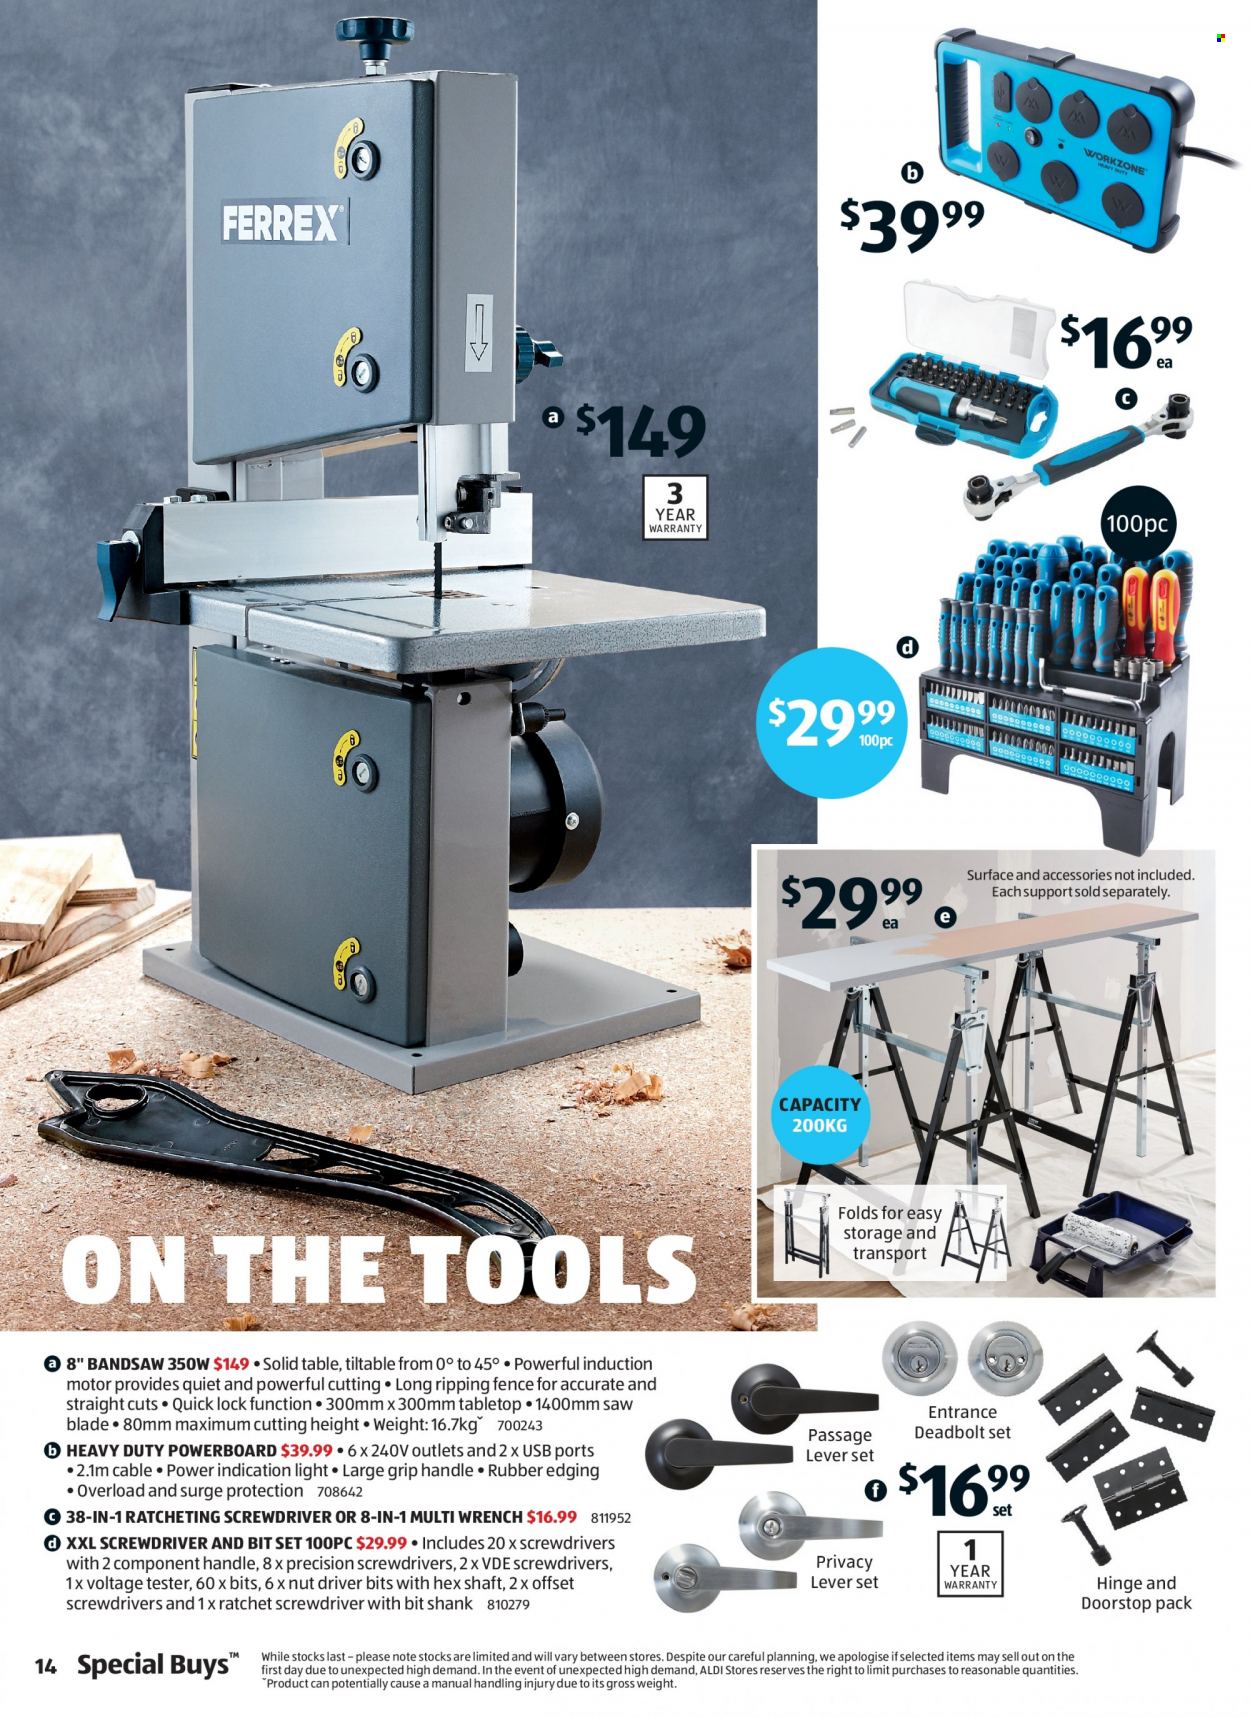 ALDI Catalogue - 12 May 2022 - 18 May 2022 - Sales products - eraser, table, lever set, screwdriver, saw. Page 14.